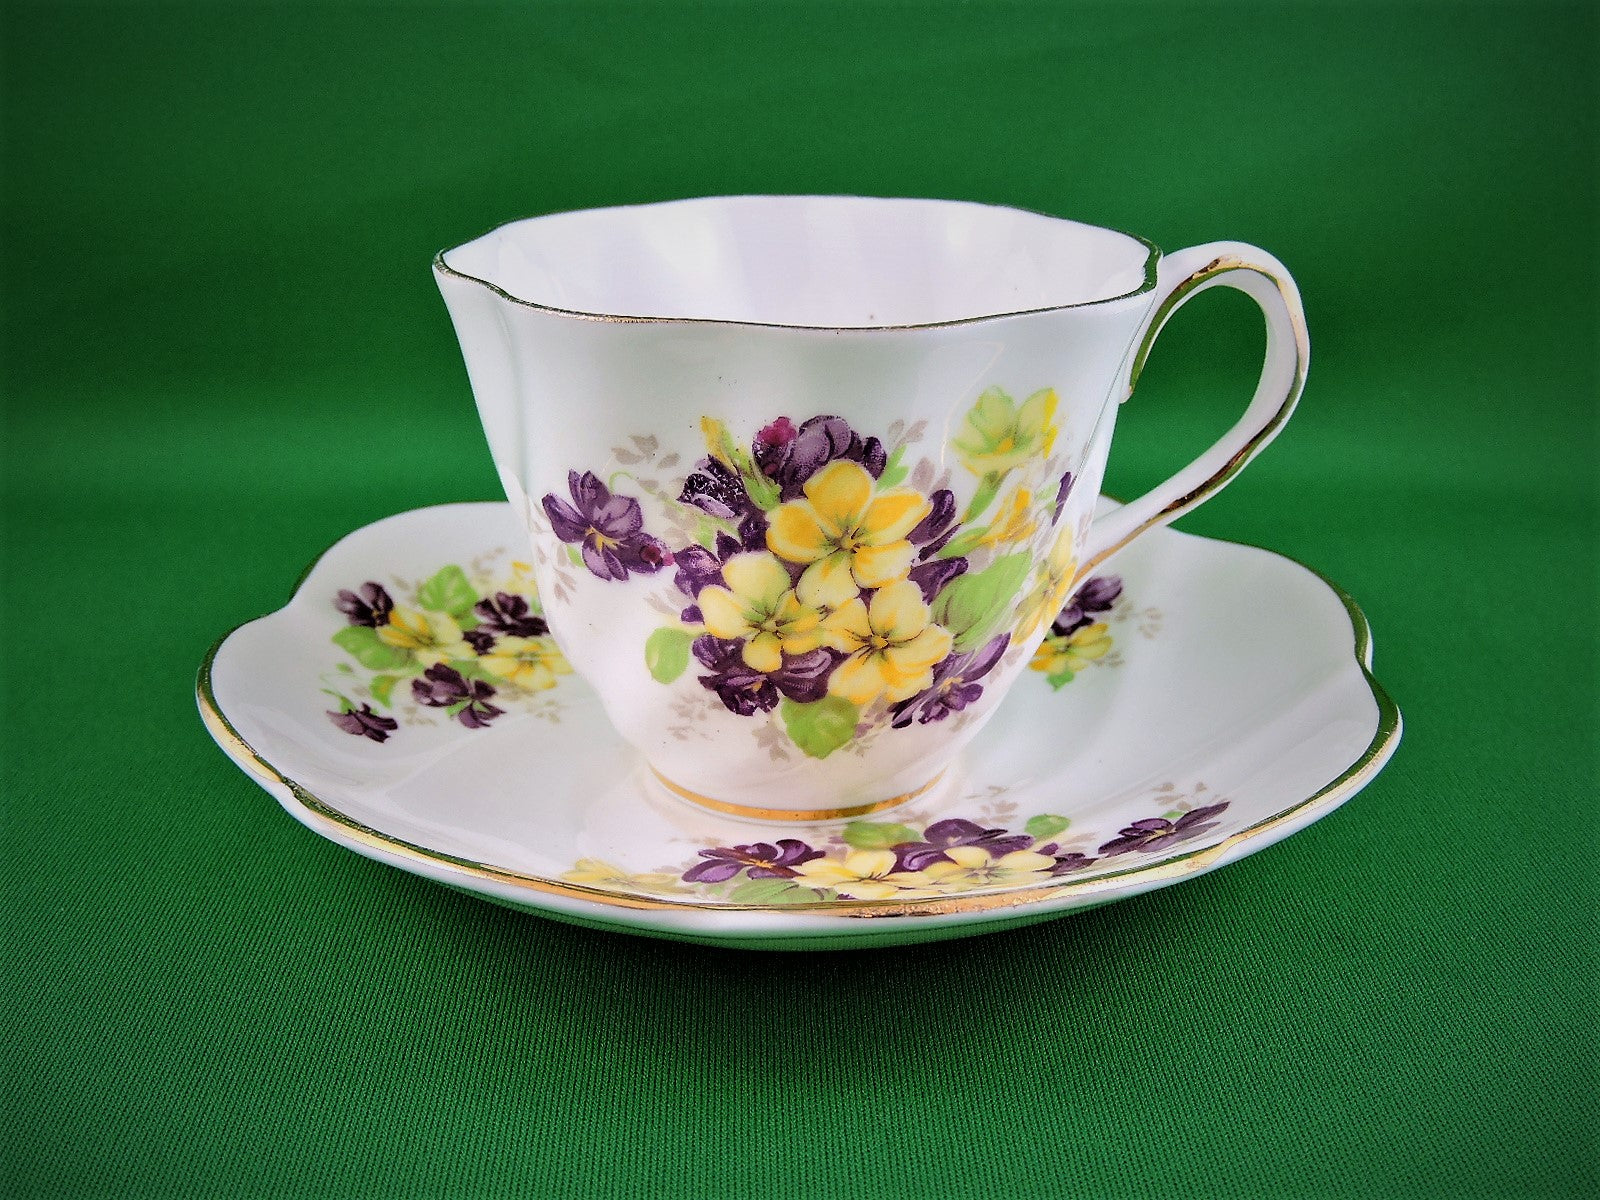 Salisbury Tea Cup and Saucer, Purple and White Flowers, Fancy High Handle,  Gold Gilt Trim, Made in England, Lovely Gift for Her, 1927-1949 